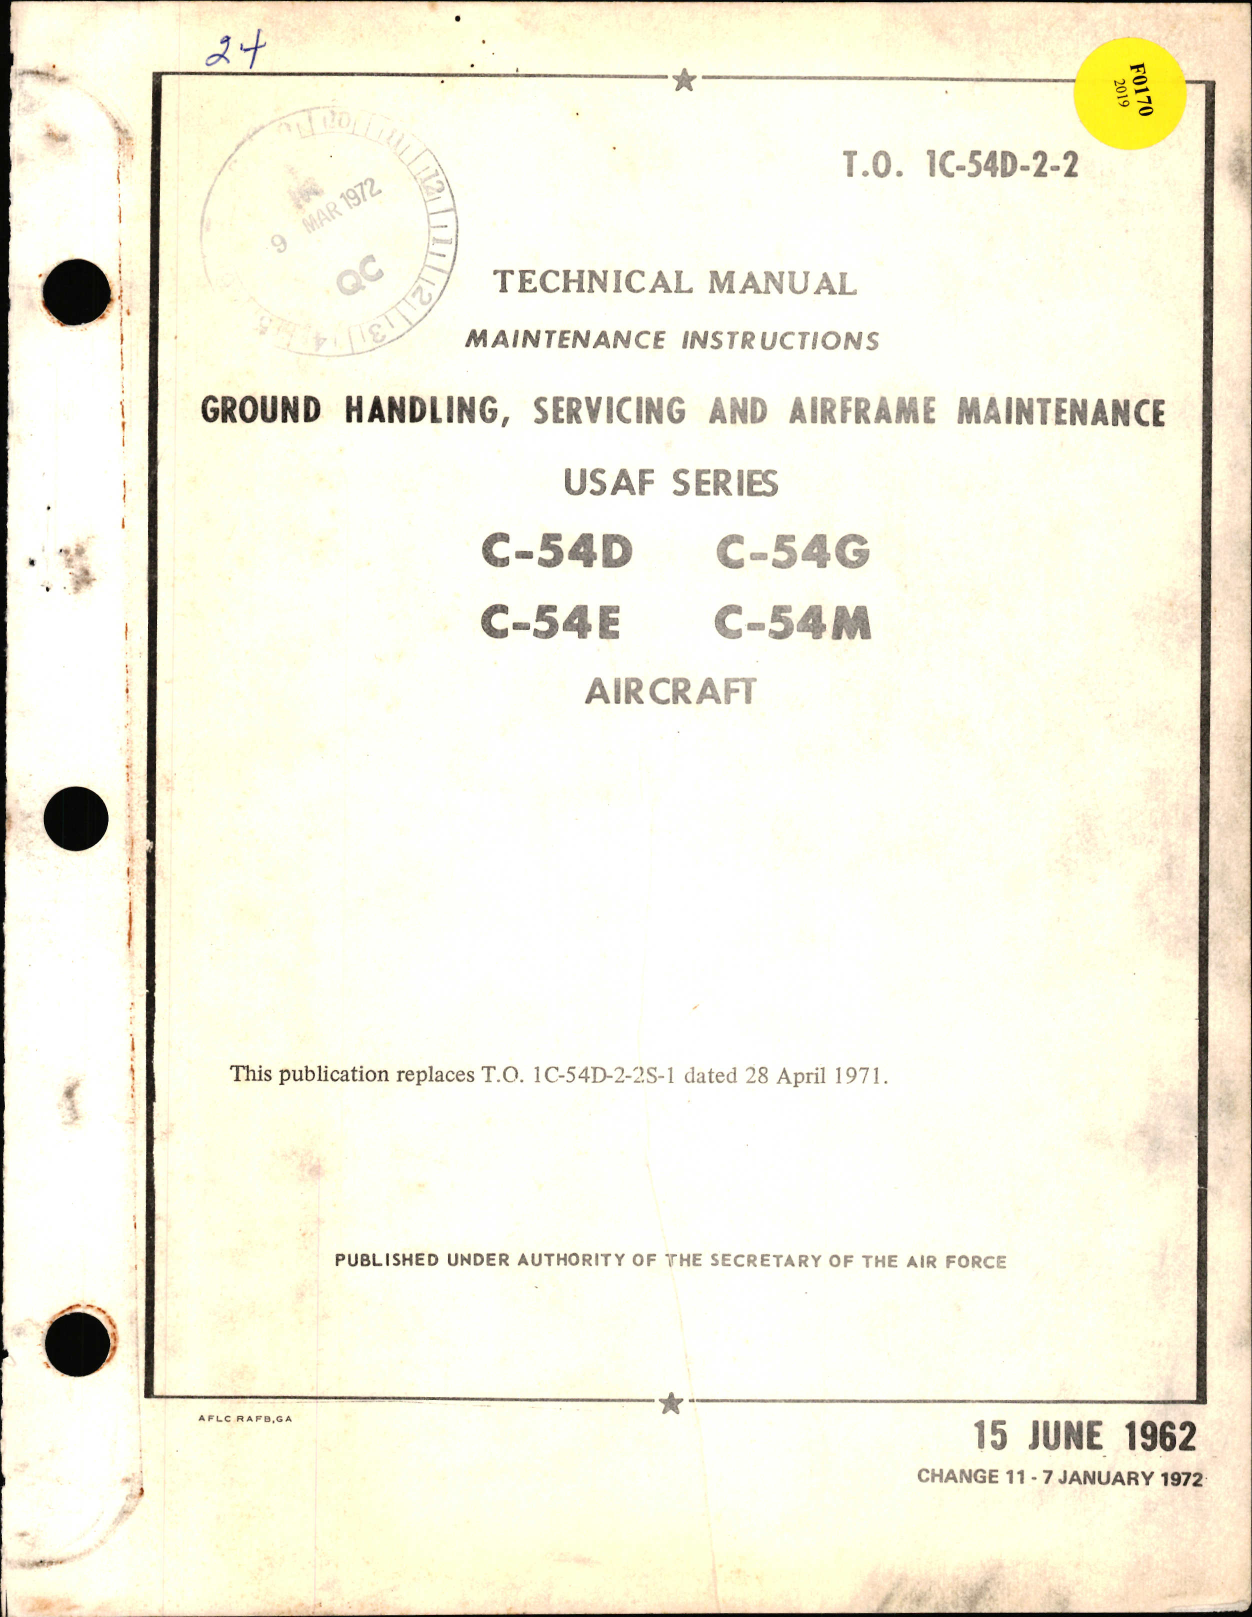 Sample page 1 from AirCorps Library document: Maintenance Instructions, Ground Handling, Servicing, and Airframe Maintenance for C-54D, D-54G, C-54E, and C-54M